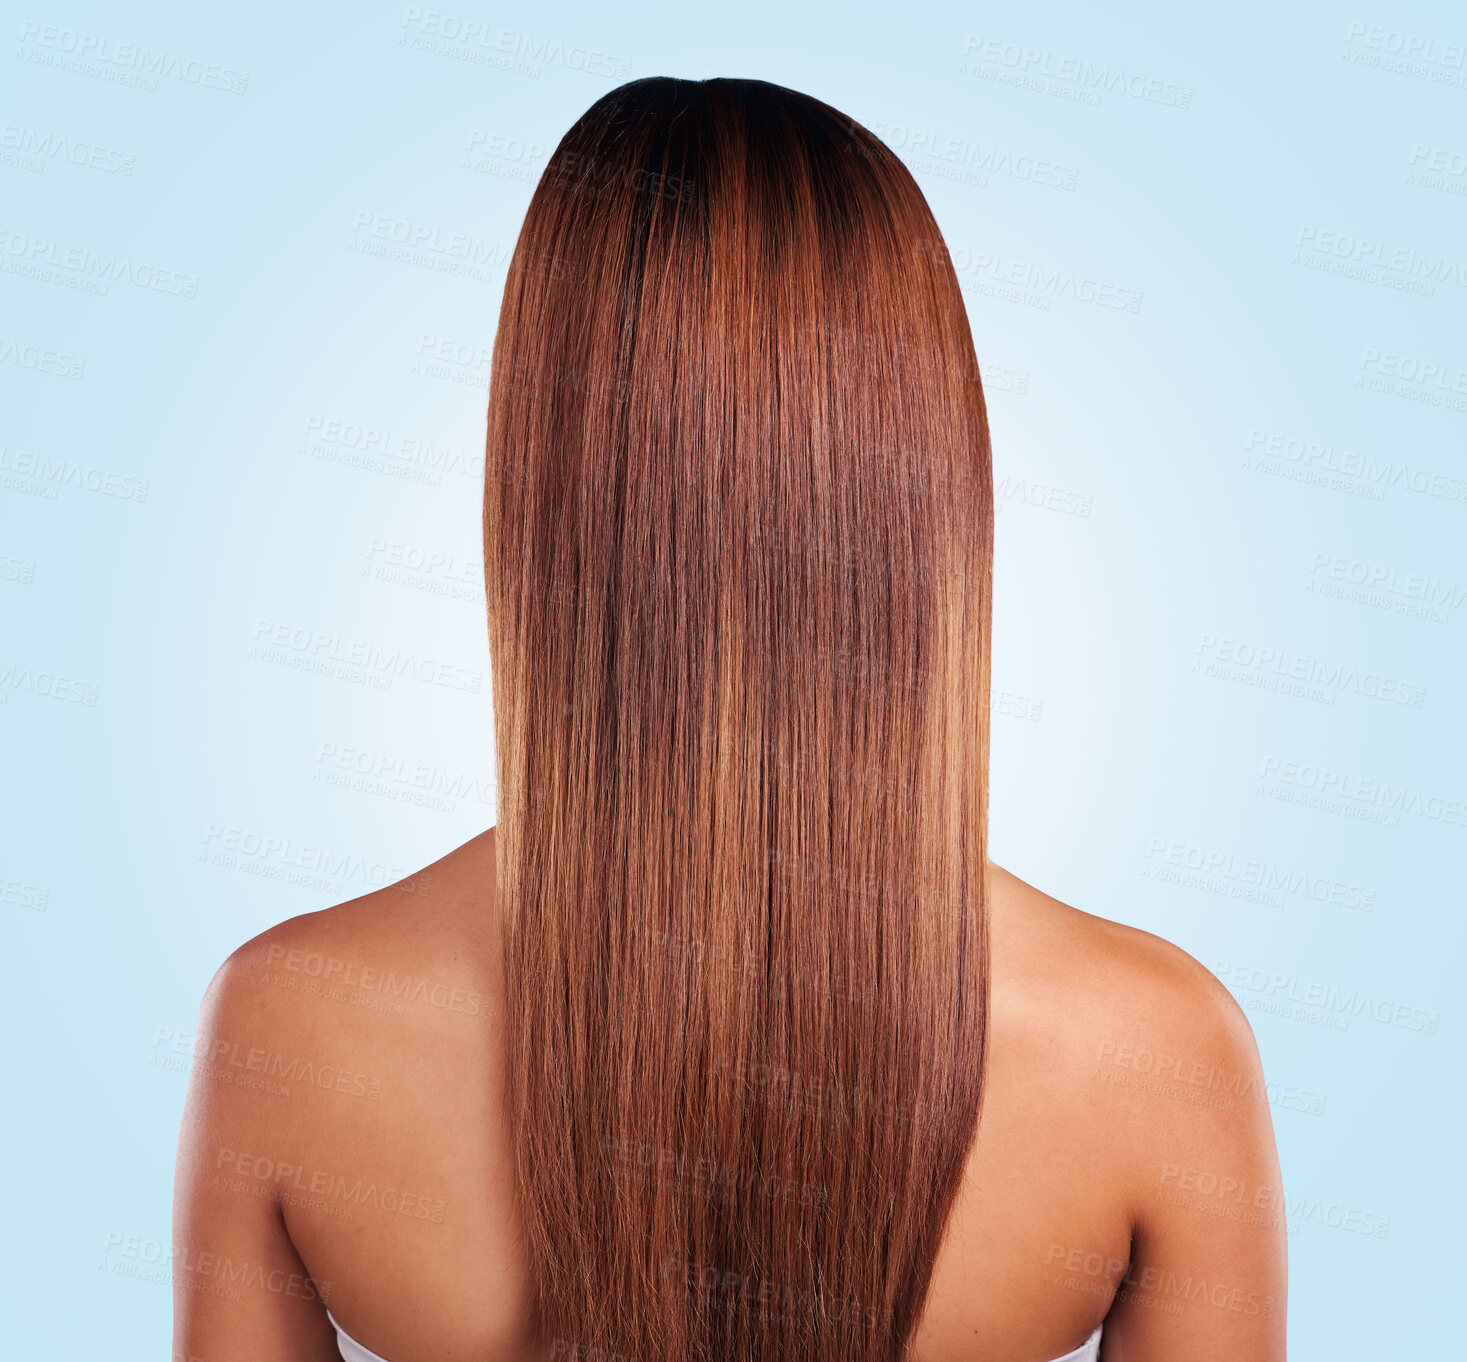 Buy stock photo Back, hair care and beauty of black woman in studio isolated on a blue background. Hairstyle, keratin cosmetics and aesthetics of female model with salon treatment for growth, texture and balayage.